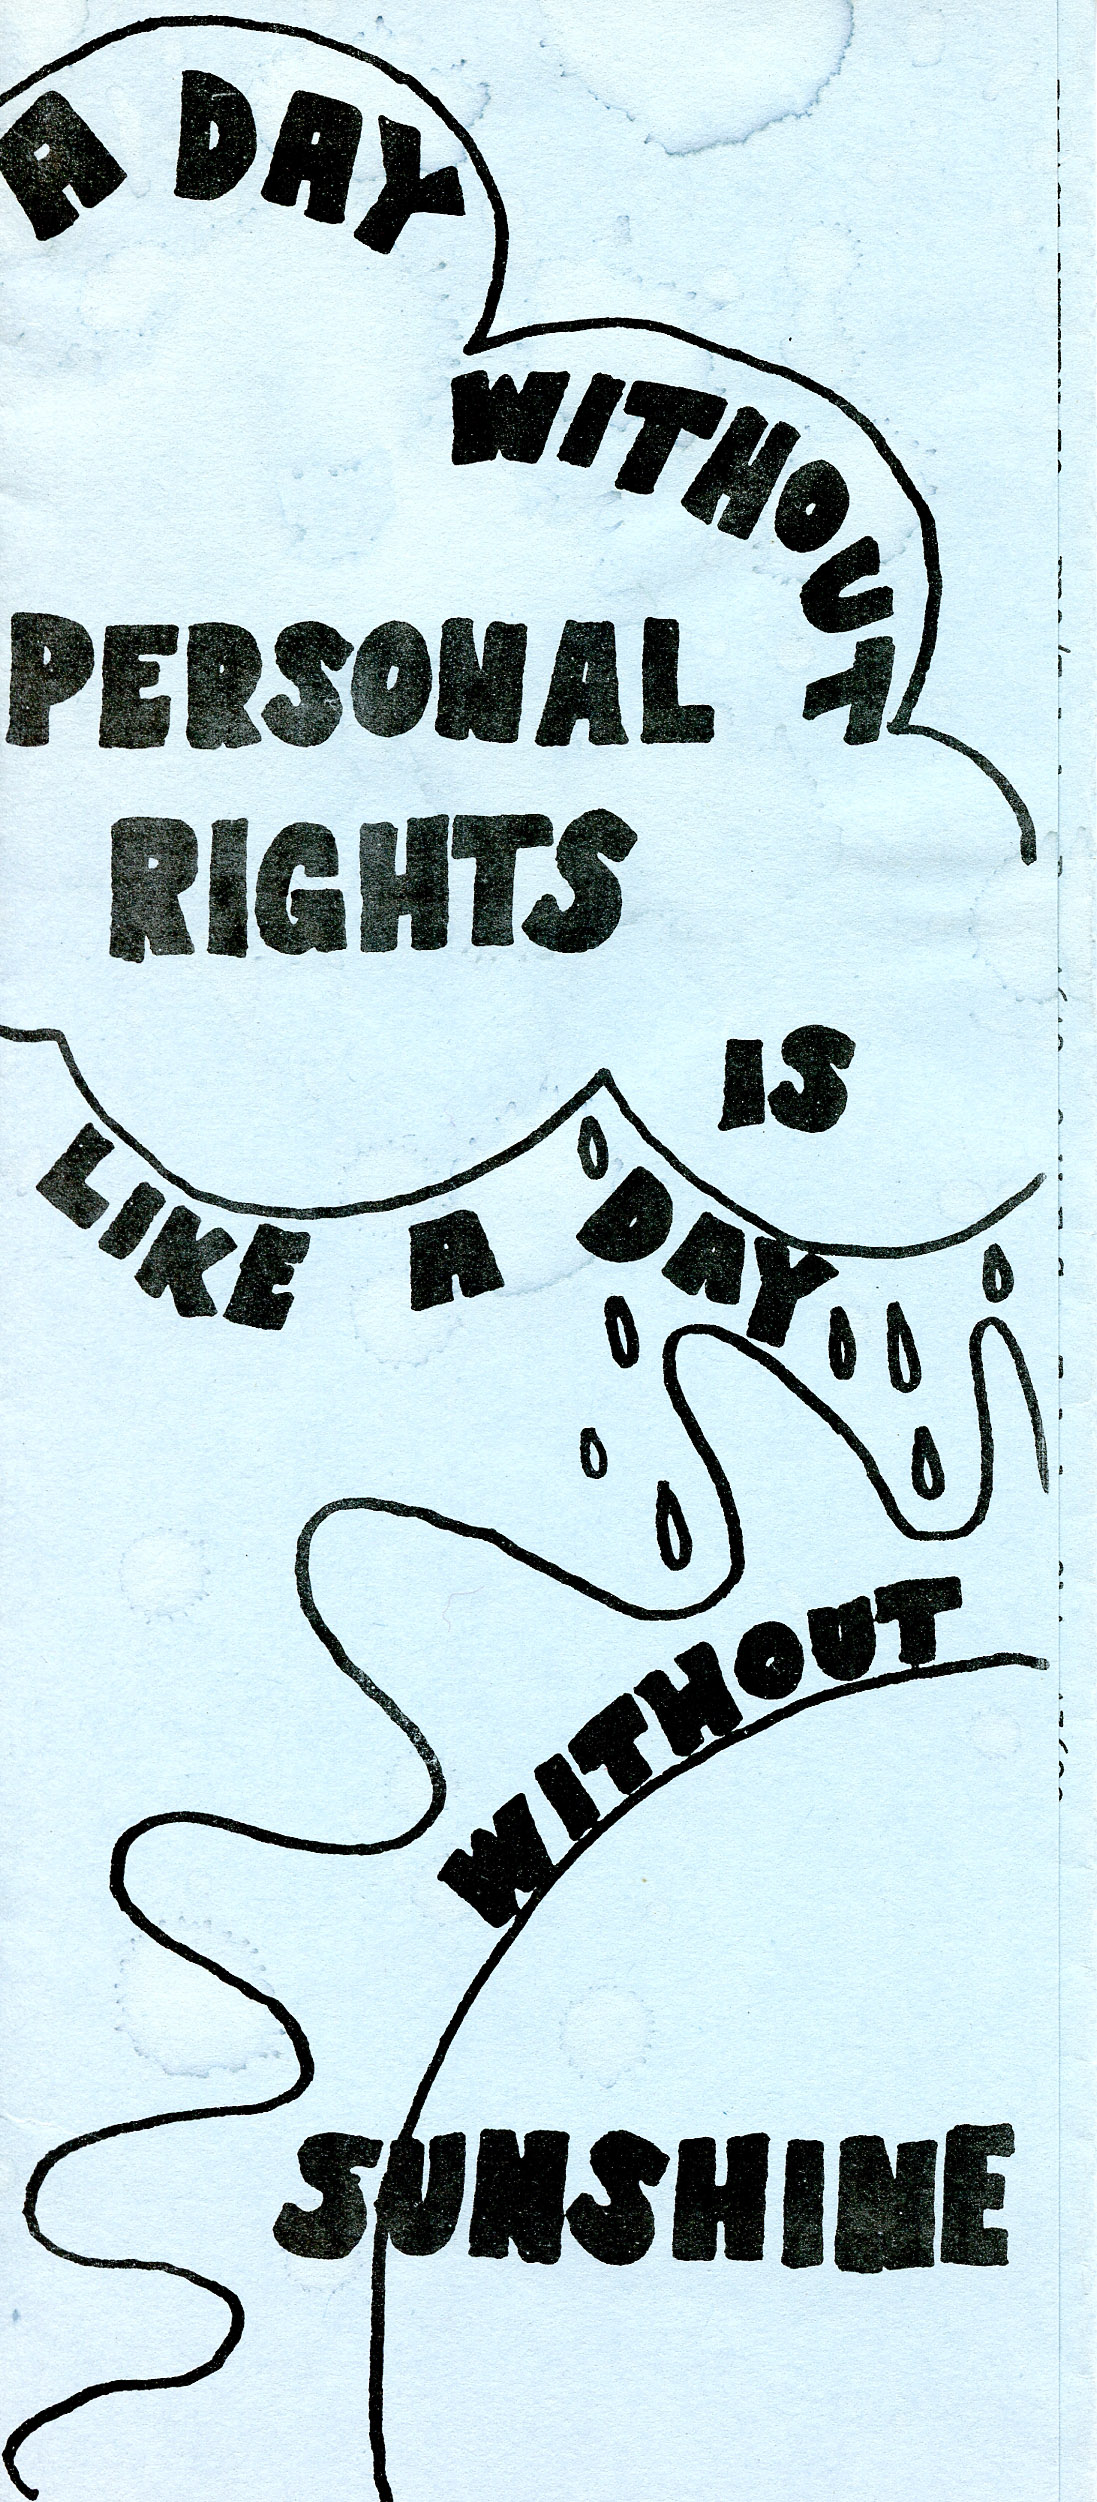 Personal Rights Brochure